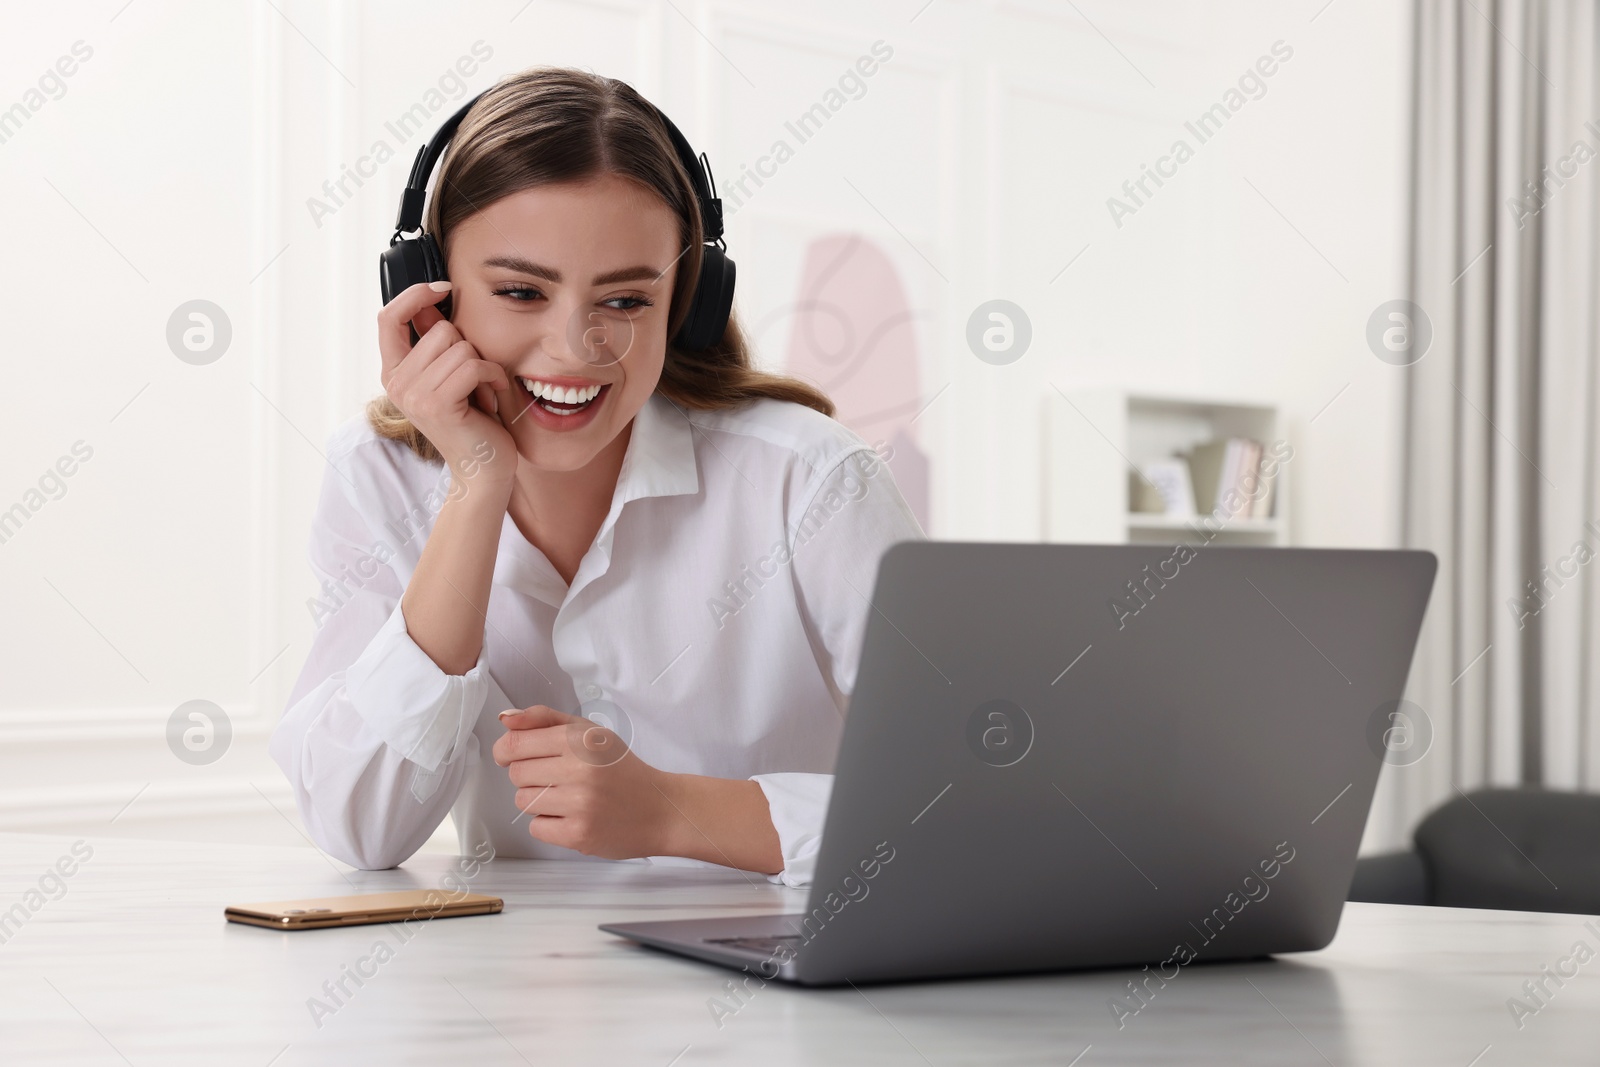 Photo of Happy woman with headphones using laptop at white table in room